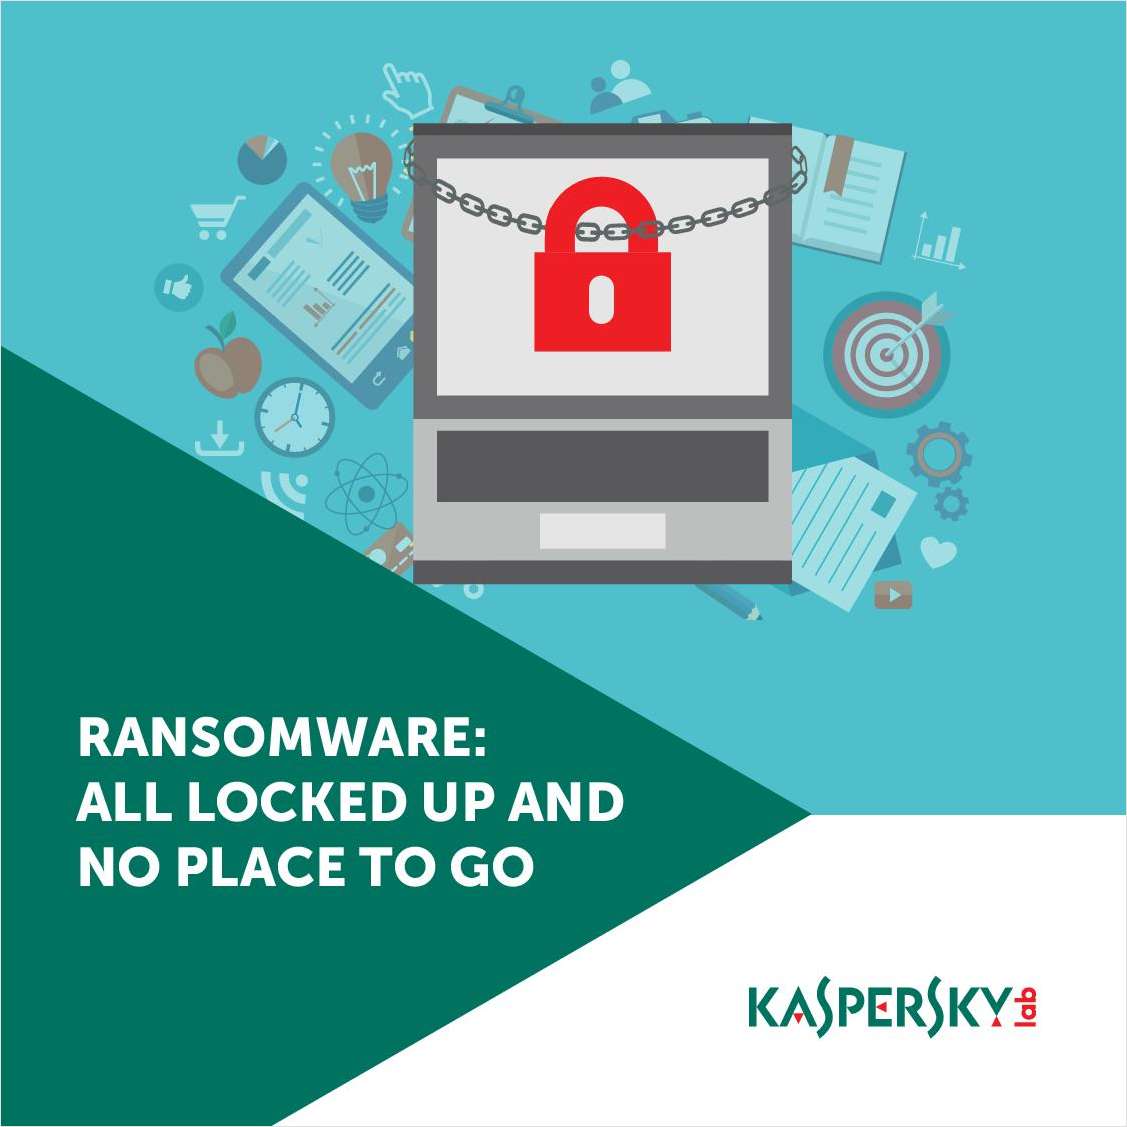 Ransomware: All Locked Up and No Place To Go